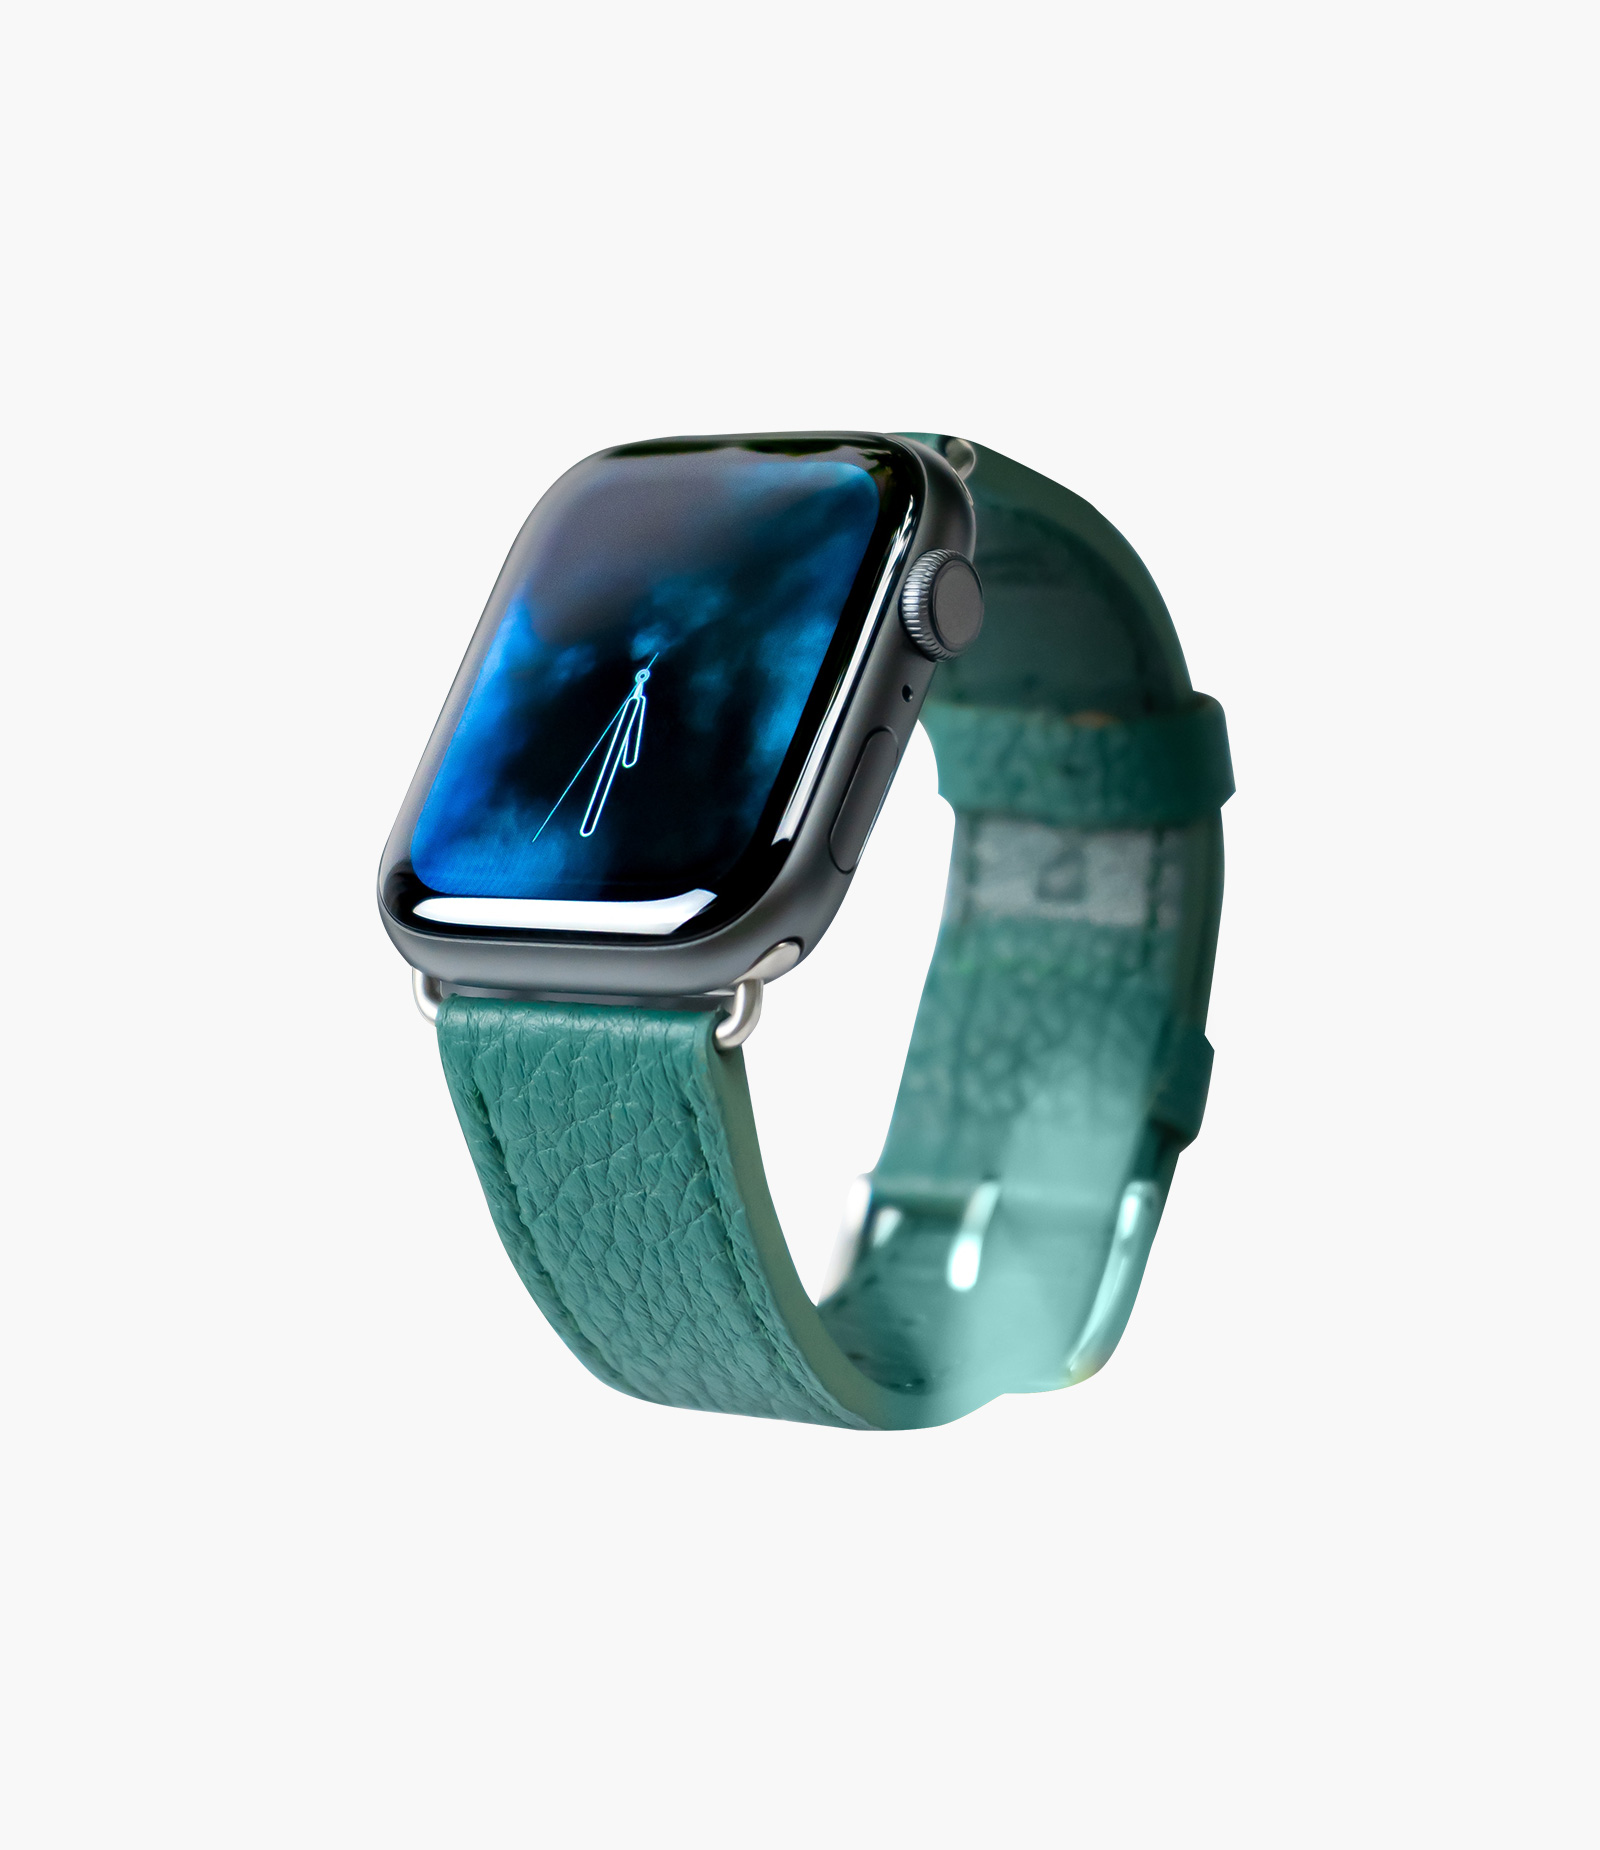 Apple Watch Series 5 Space Gray Aluminum Case with Green Leather Strap